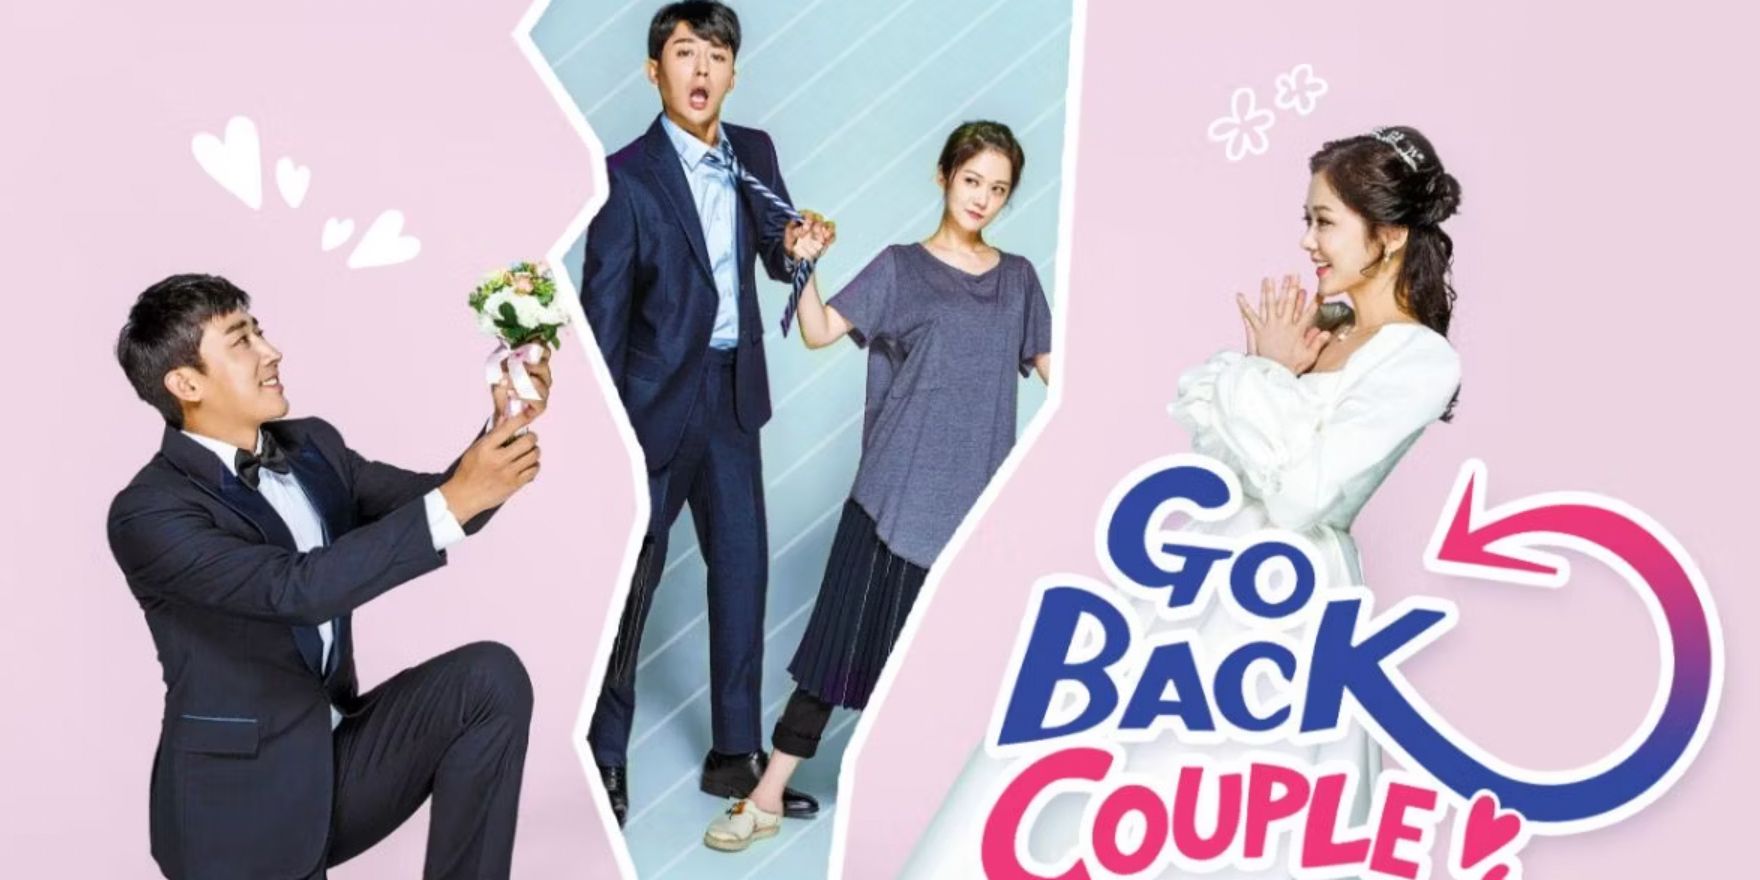 A cropped poster image features the characters of the Korean time travel drama The Go Bck Couple